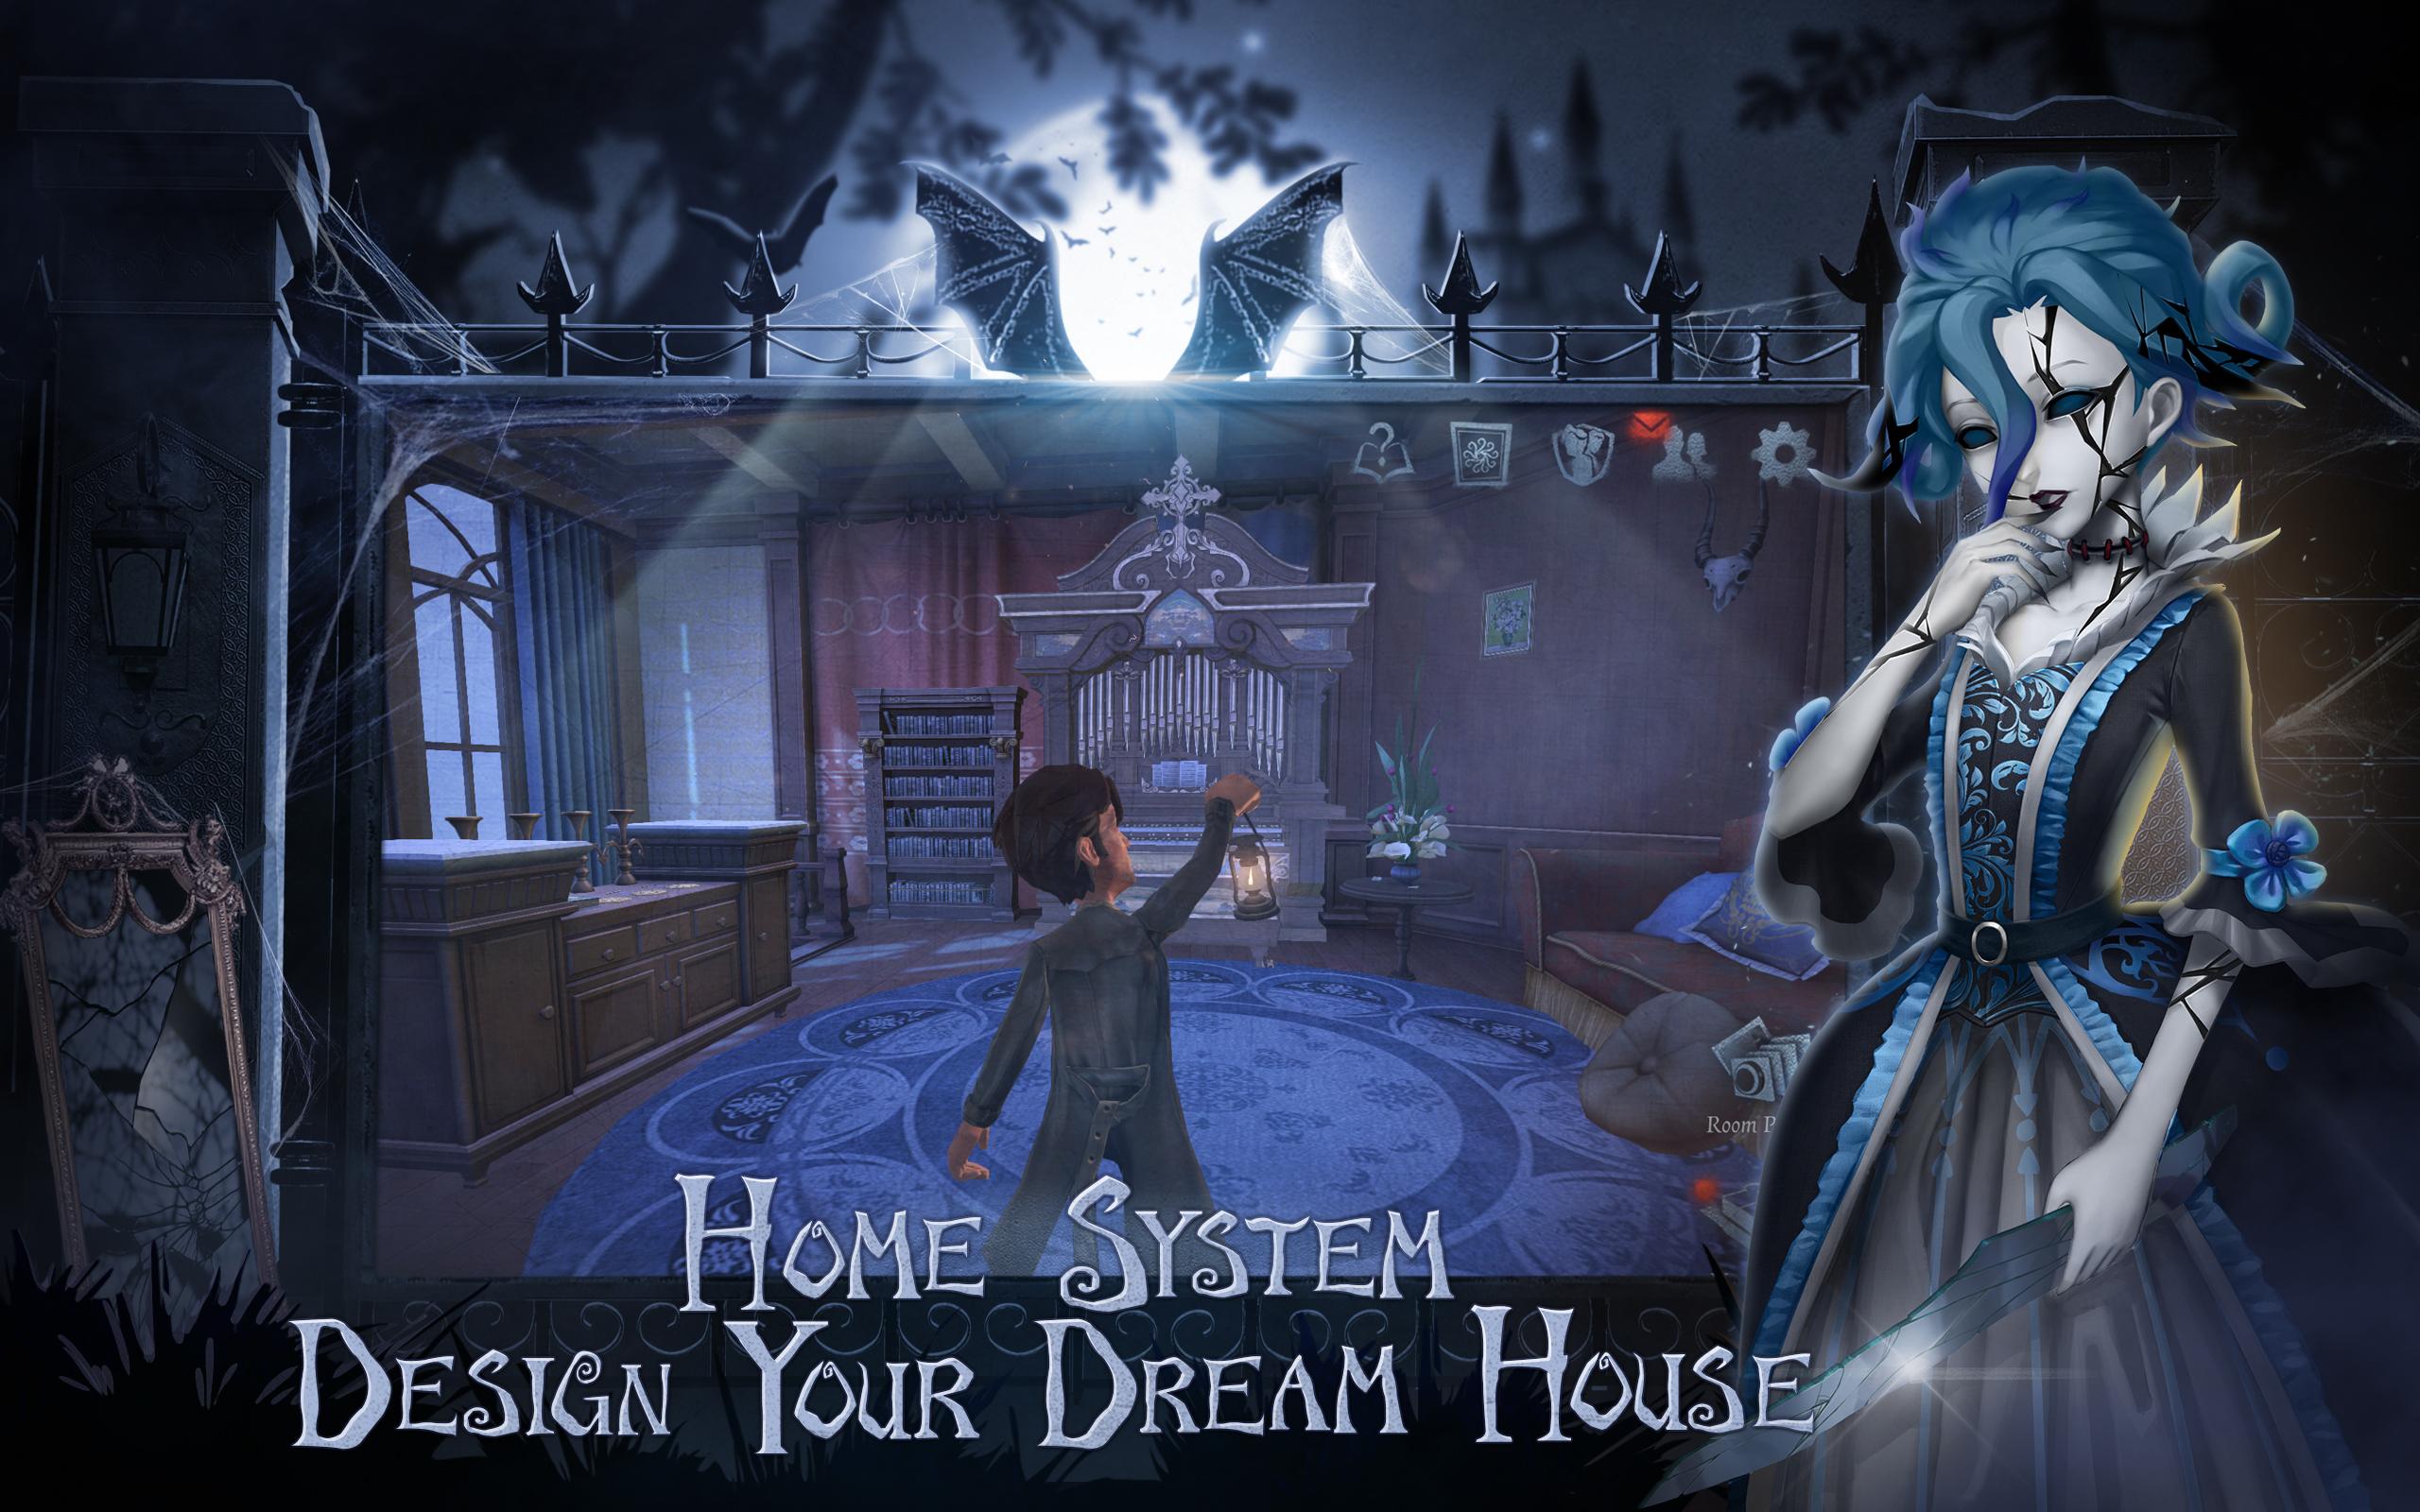 Identity V for Android - APK Download - 